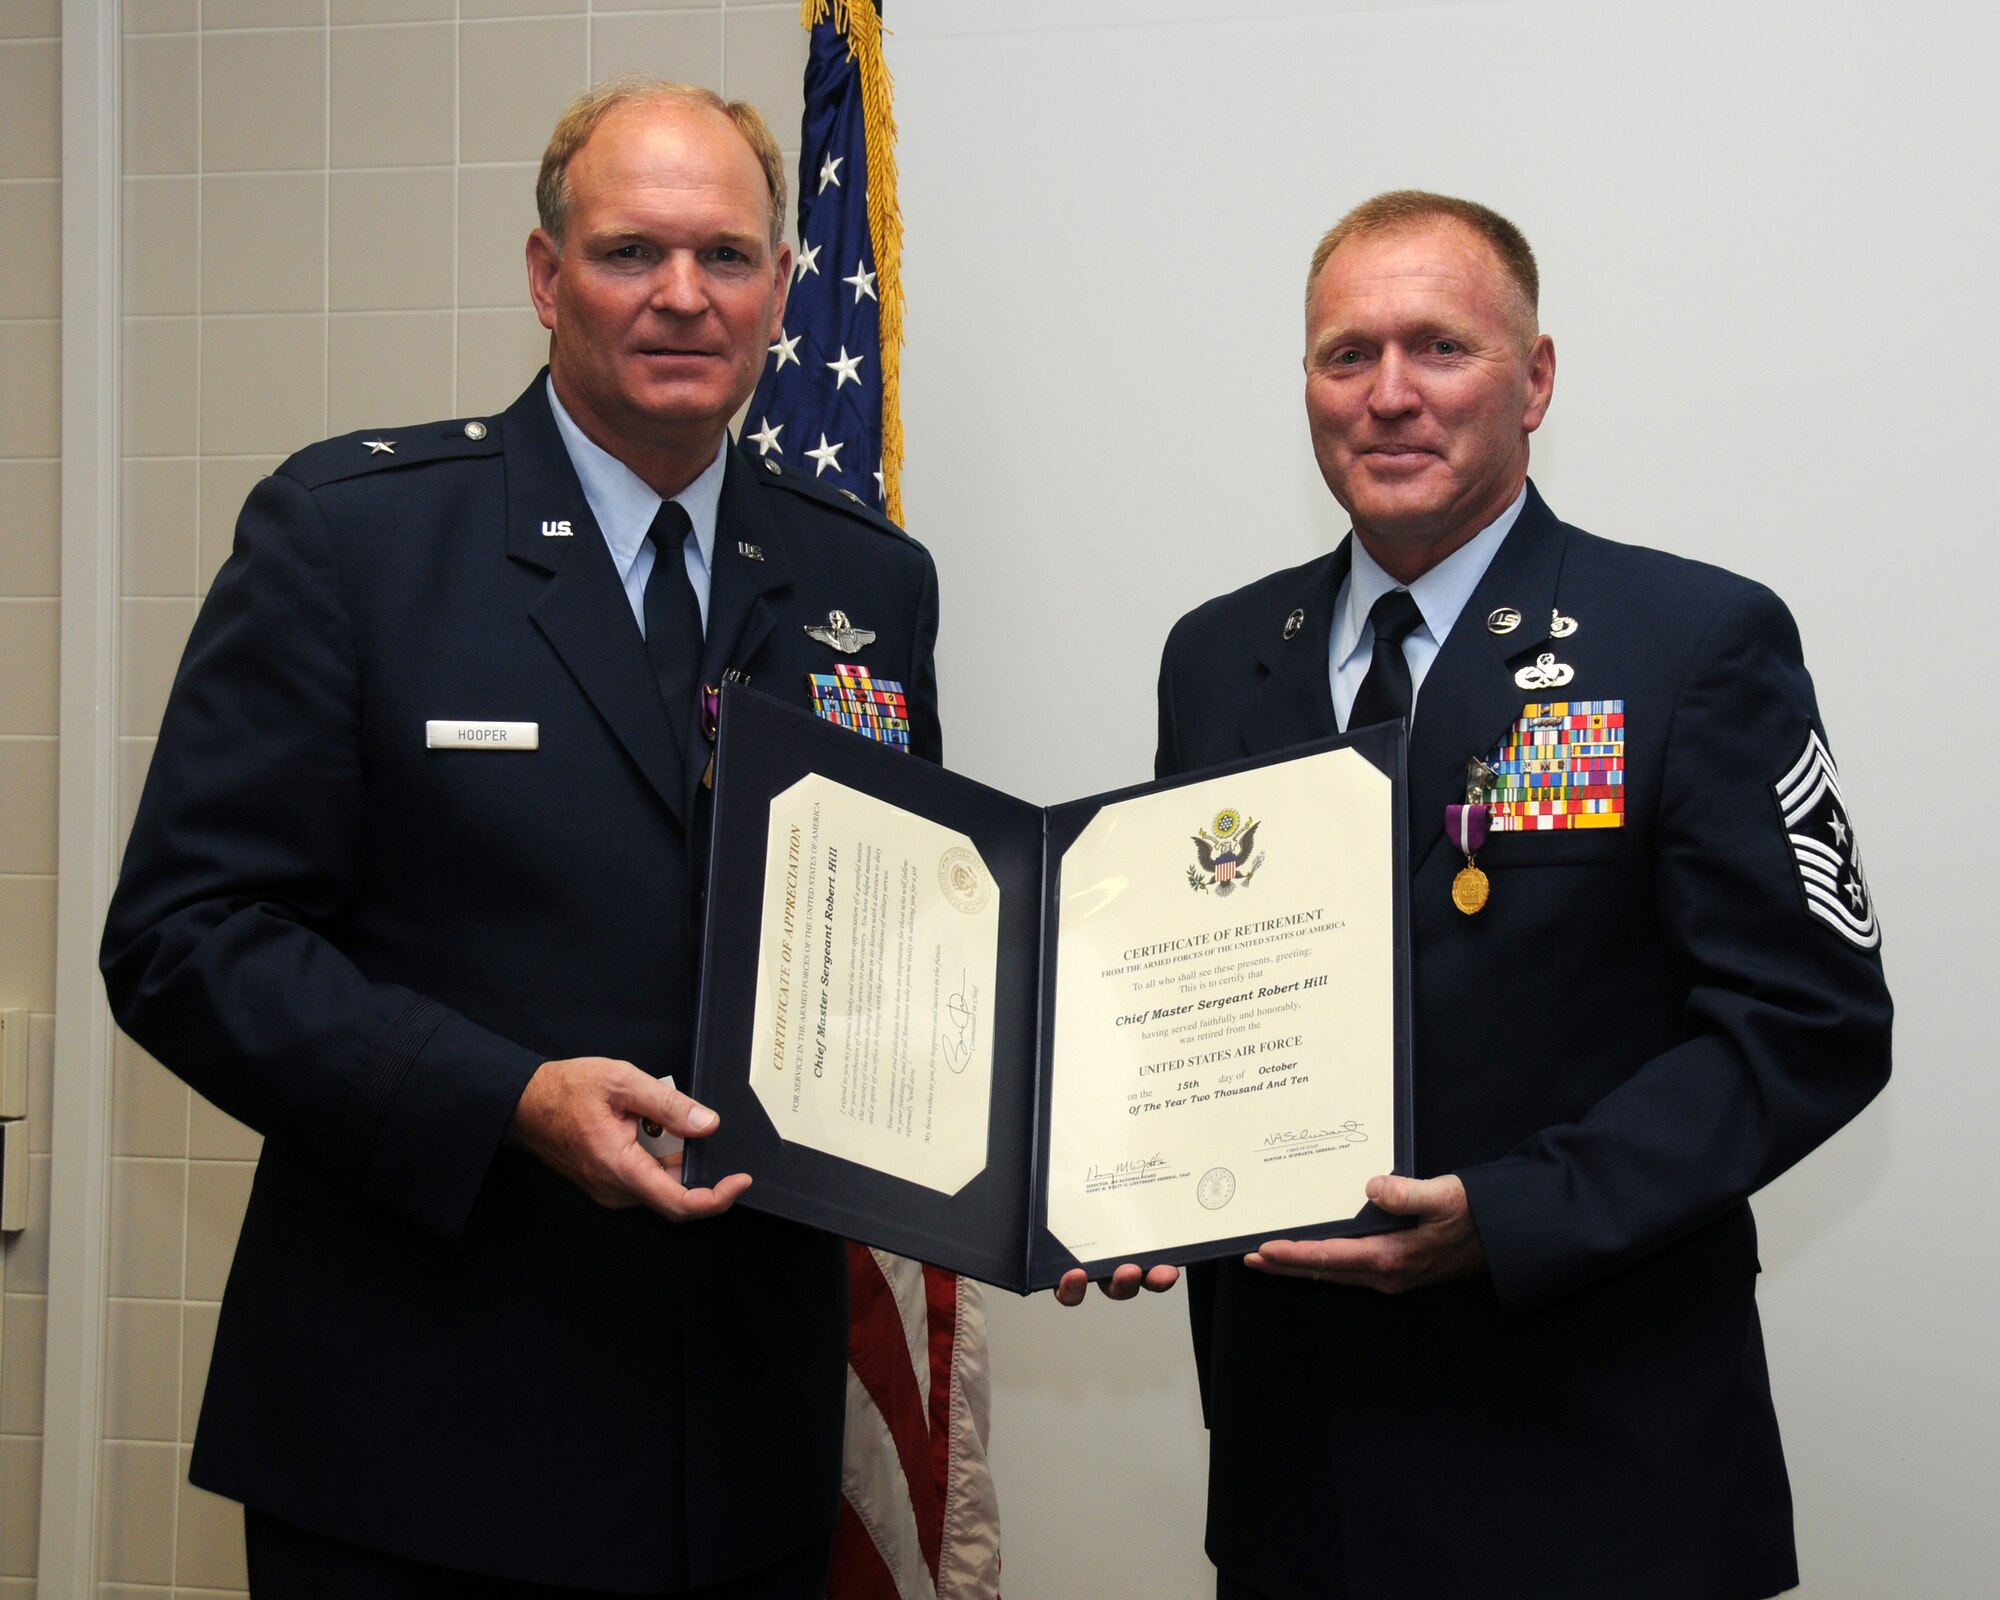 A retirement ceremony was held on the Utah Air National Guard base for General David M. Hooper and Chief Robert A. Hill July 10. General David M. Hooper and Chief Robert A. Hill both served in the military for 32 years.  (U.S. Air Force photo by Staff Sgt. Emily Monson)	